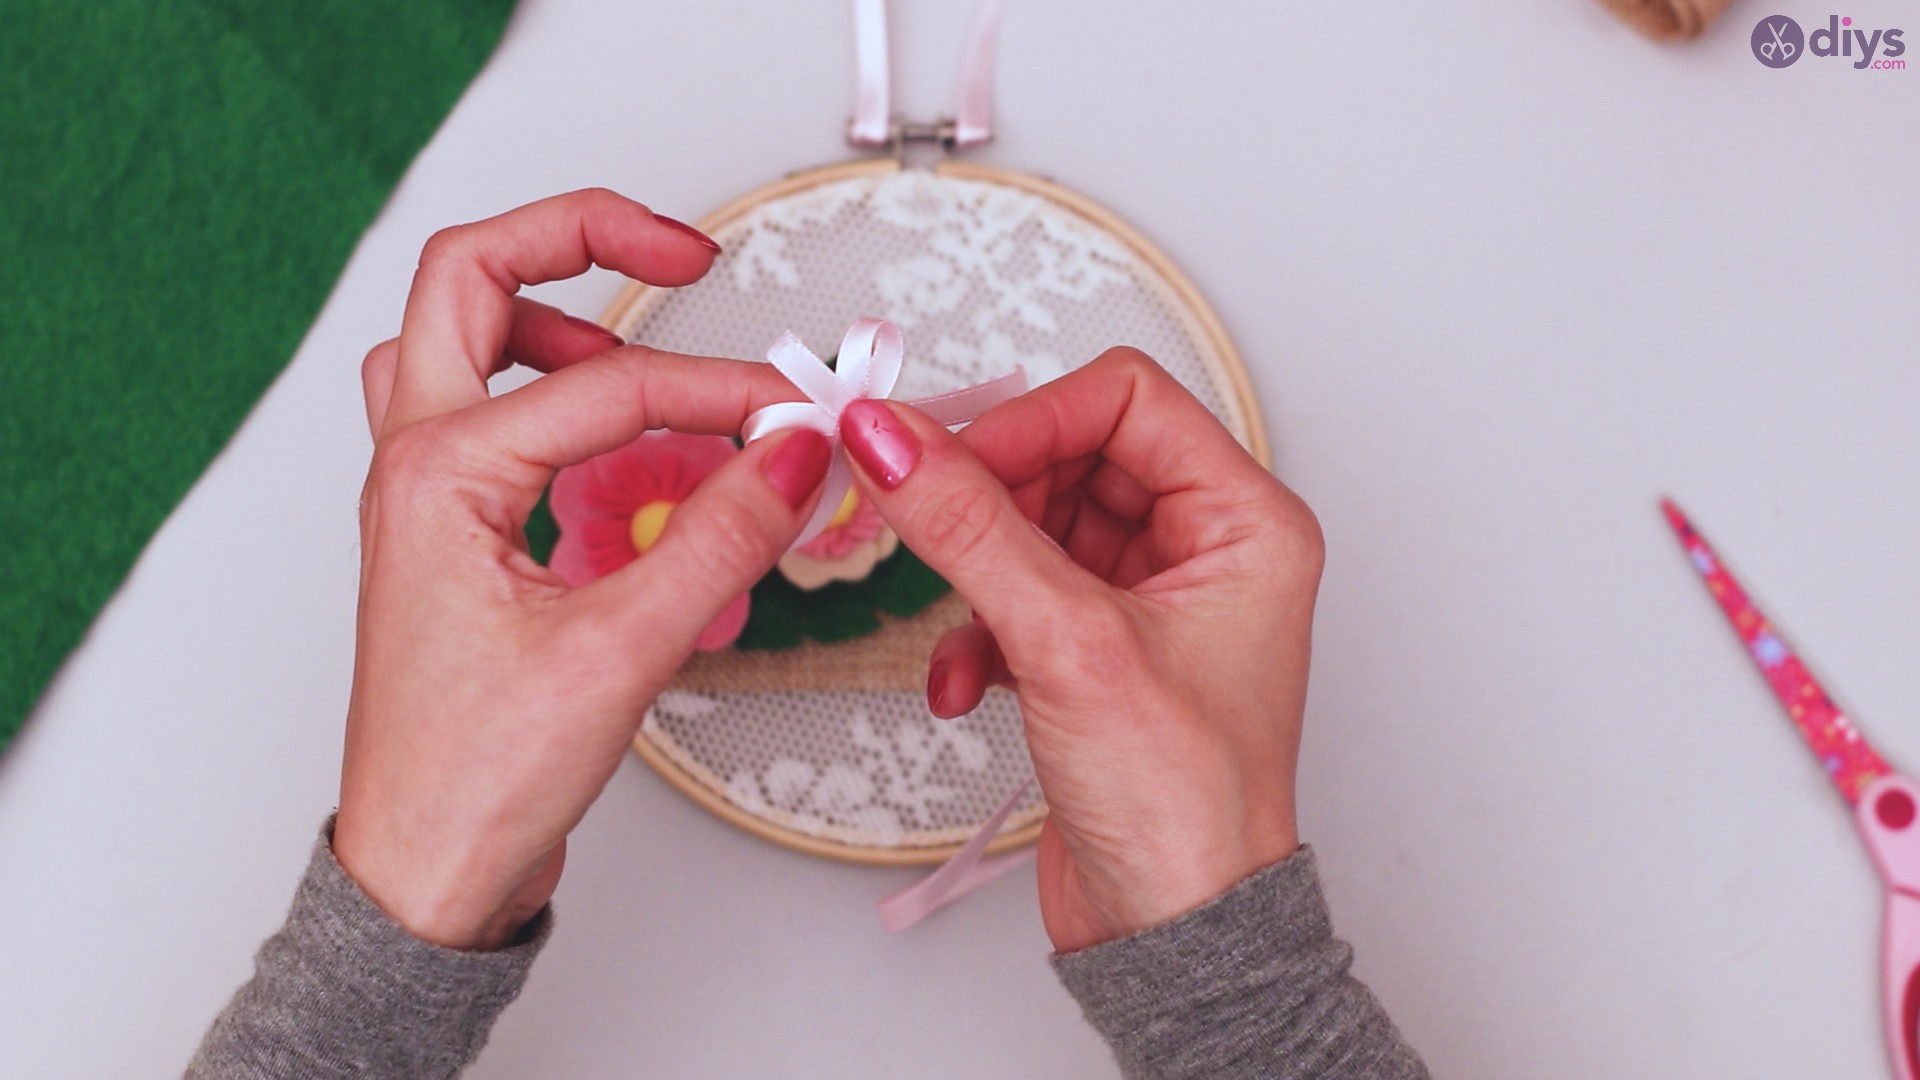 Diy embroidery hoop wall decor tutorial step by step (66)